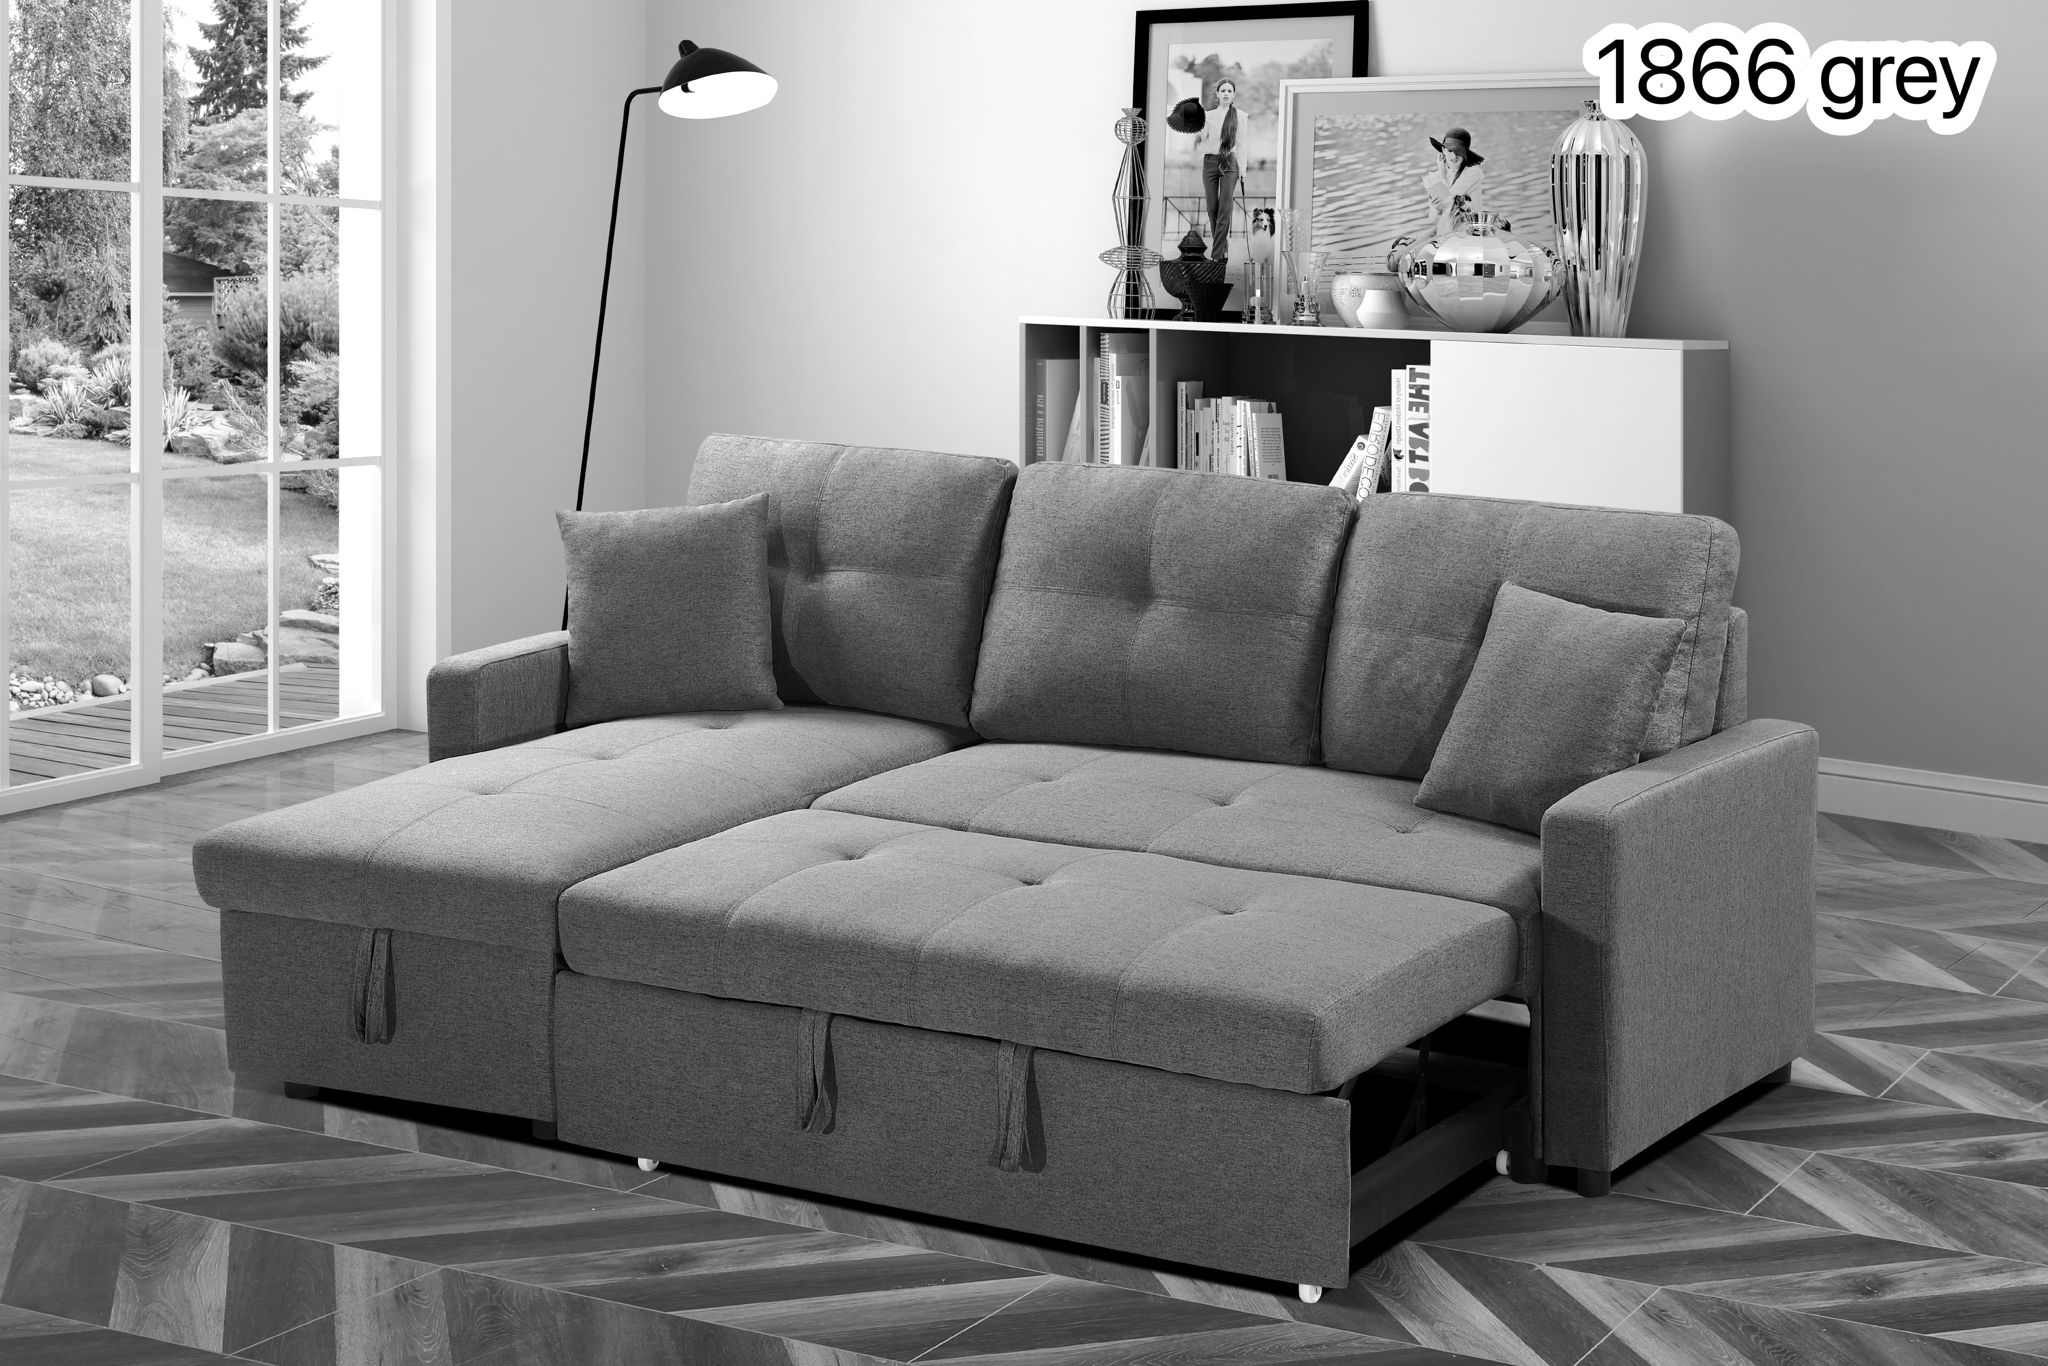 Reversible Grey Pull Out Sectional Sofa Bed With Storage 1866